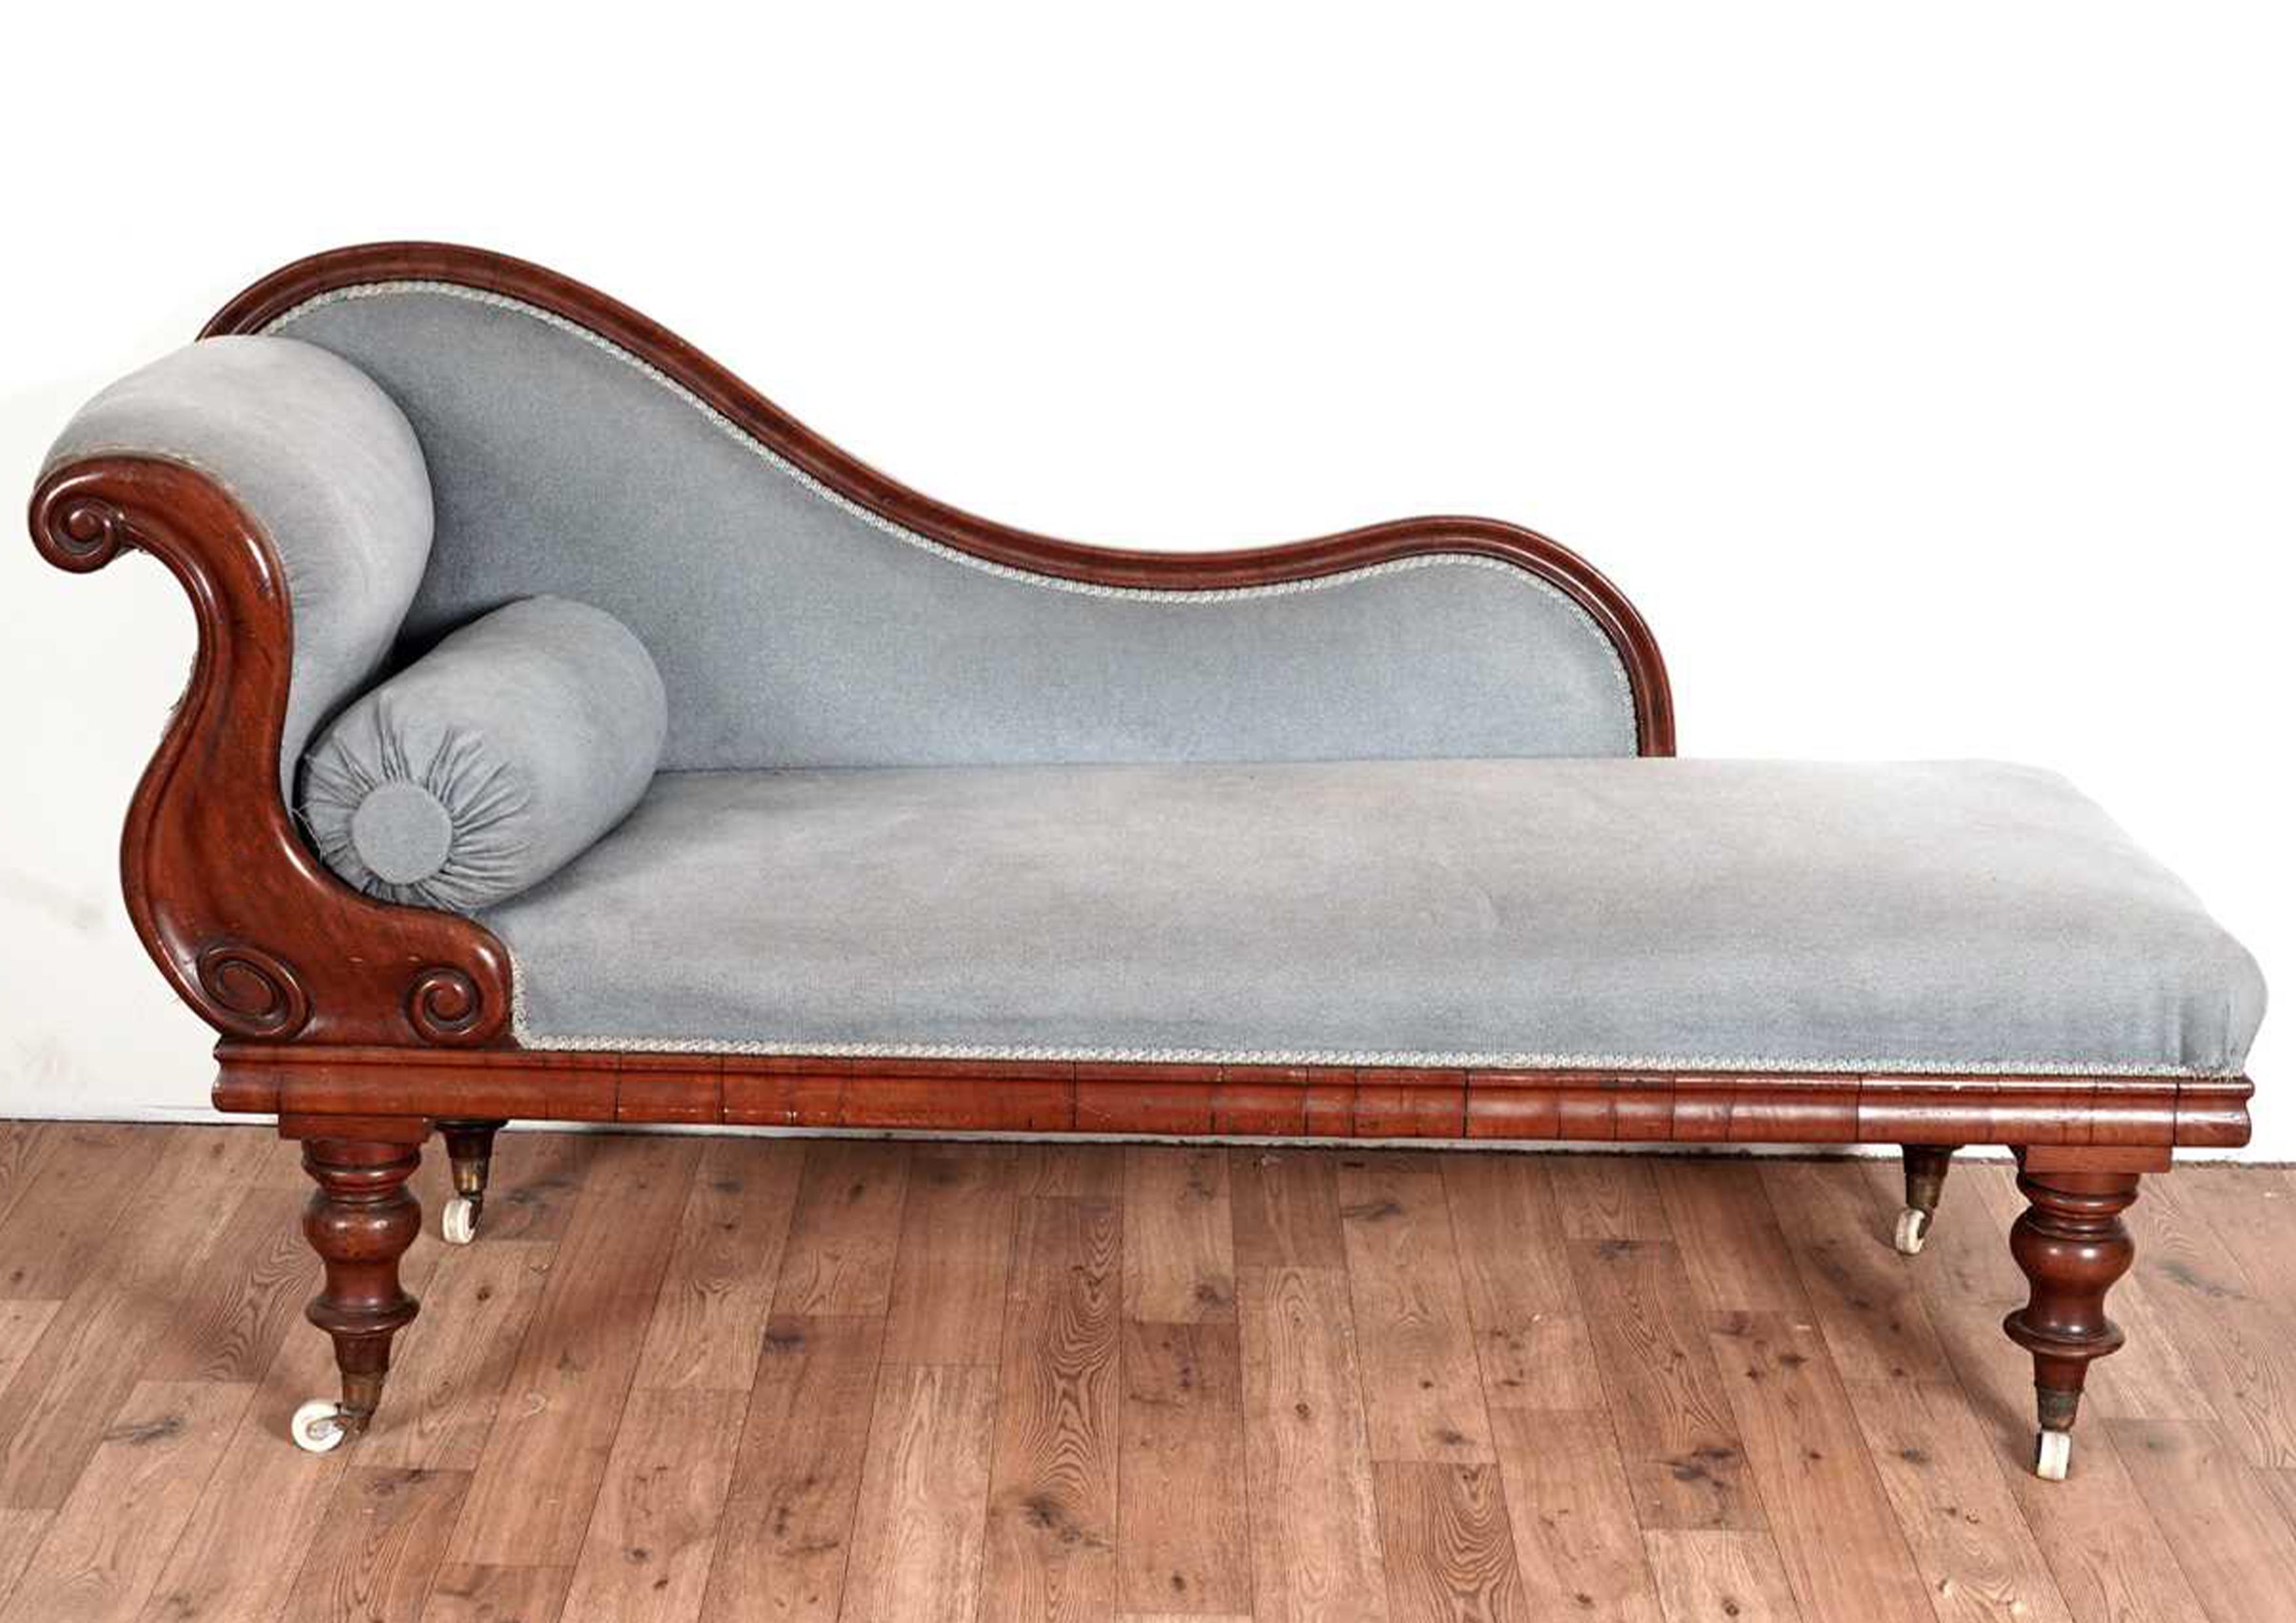 A Victorian Mahogany Swan Back Chaise Longue Day Bed Upholstered in a Duck Egg Blue Plush Fabric With A Carved Scroll End Back Rest. Brass Terminating Turned Legs on Original White Ceramic Castors.

